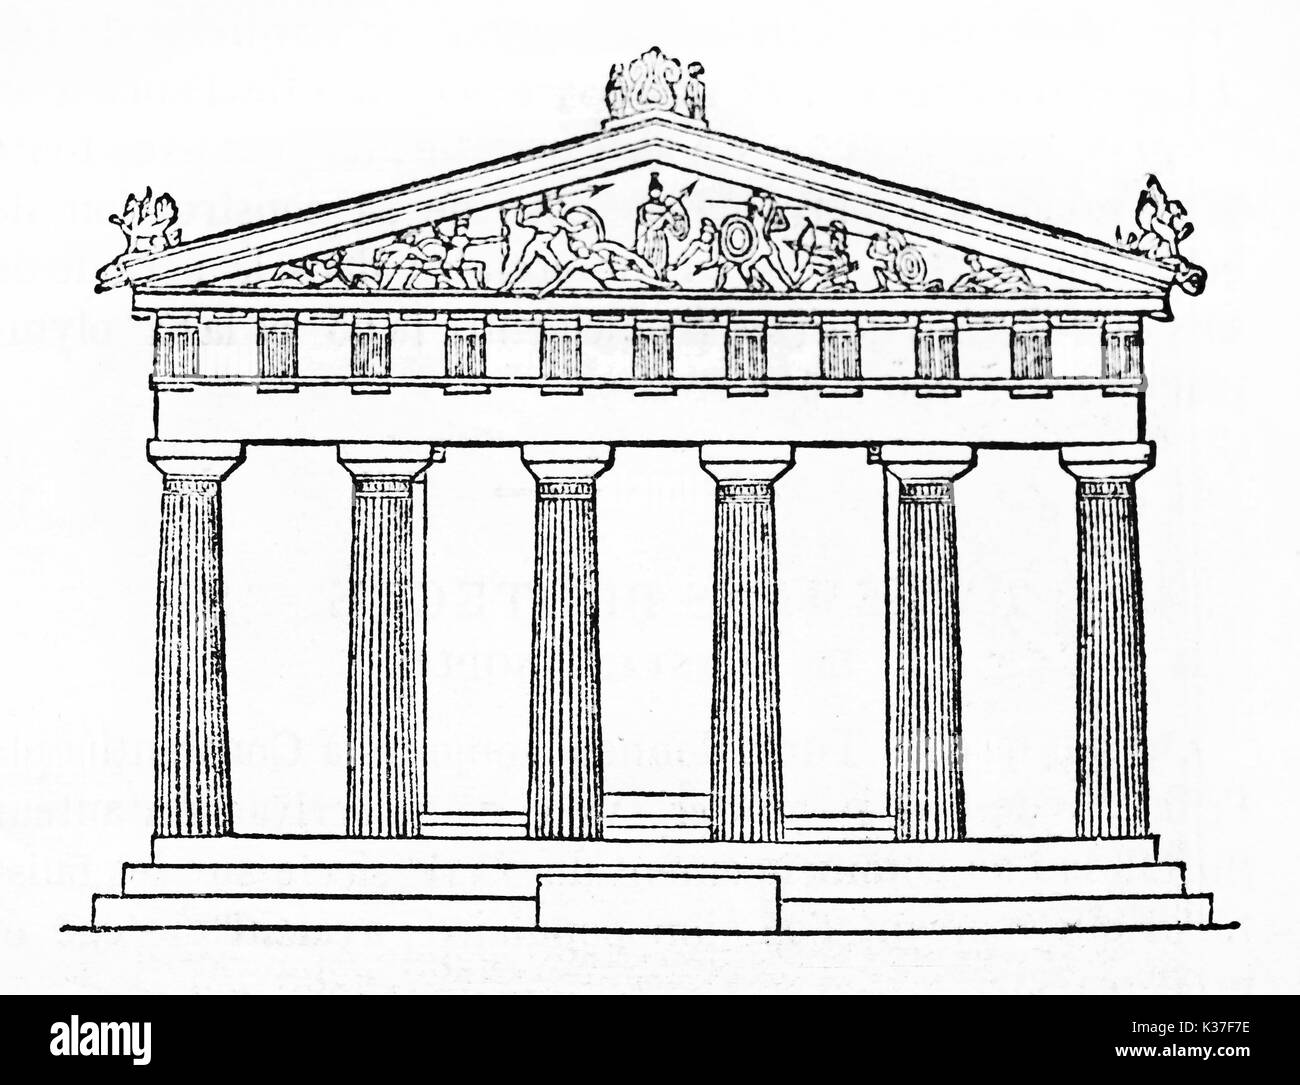 Schematic view of the main side of a doric style greek temple, Temple of Aphaea, Greece. Old isolated Illustration by unidentified author published on Magasin Pittoresque Paris 1834 Stock Photo